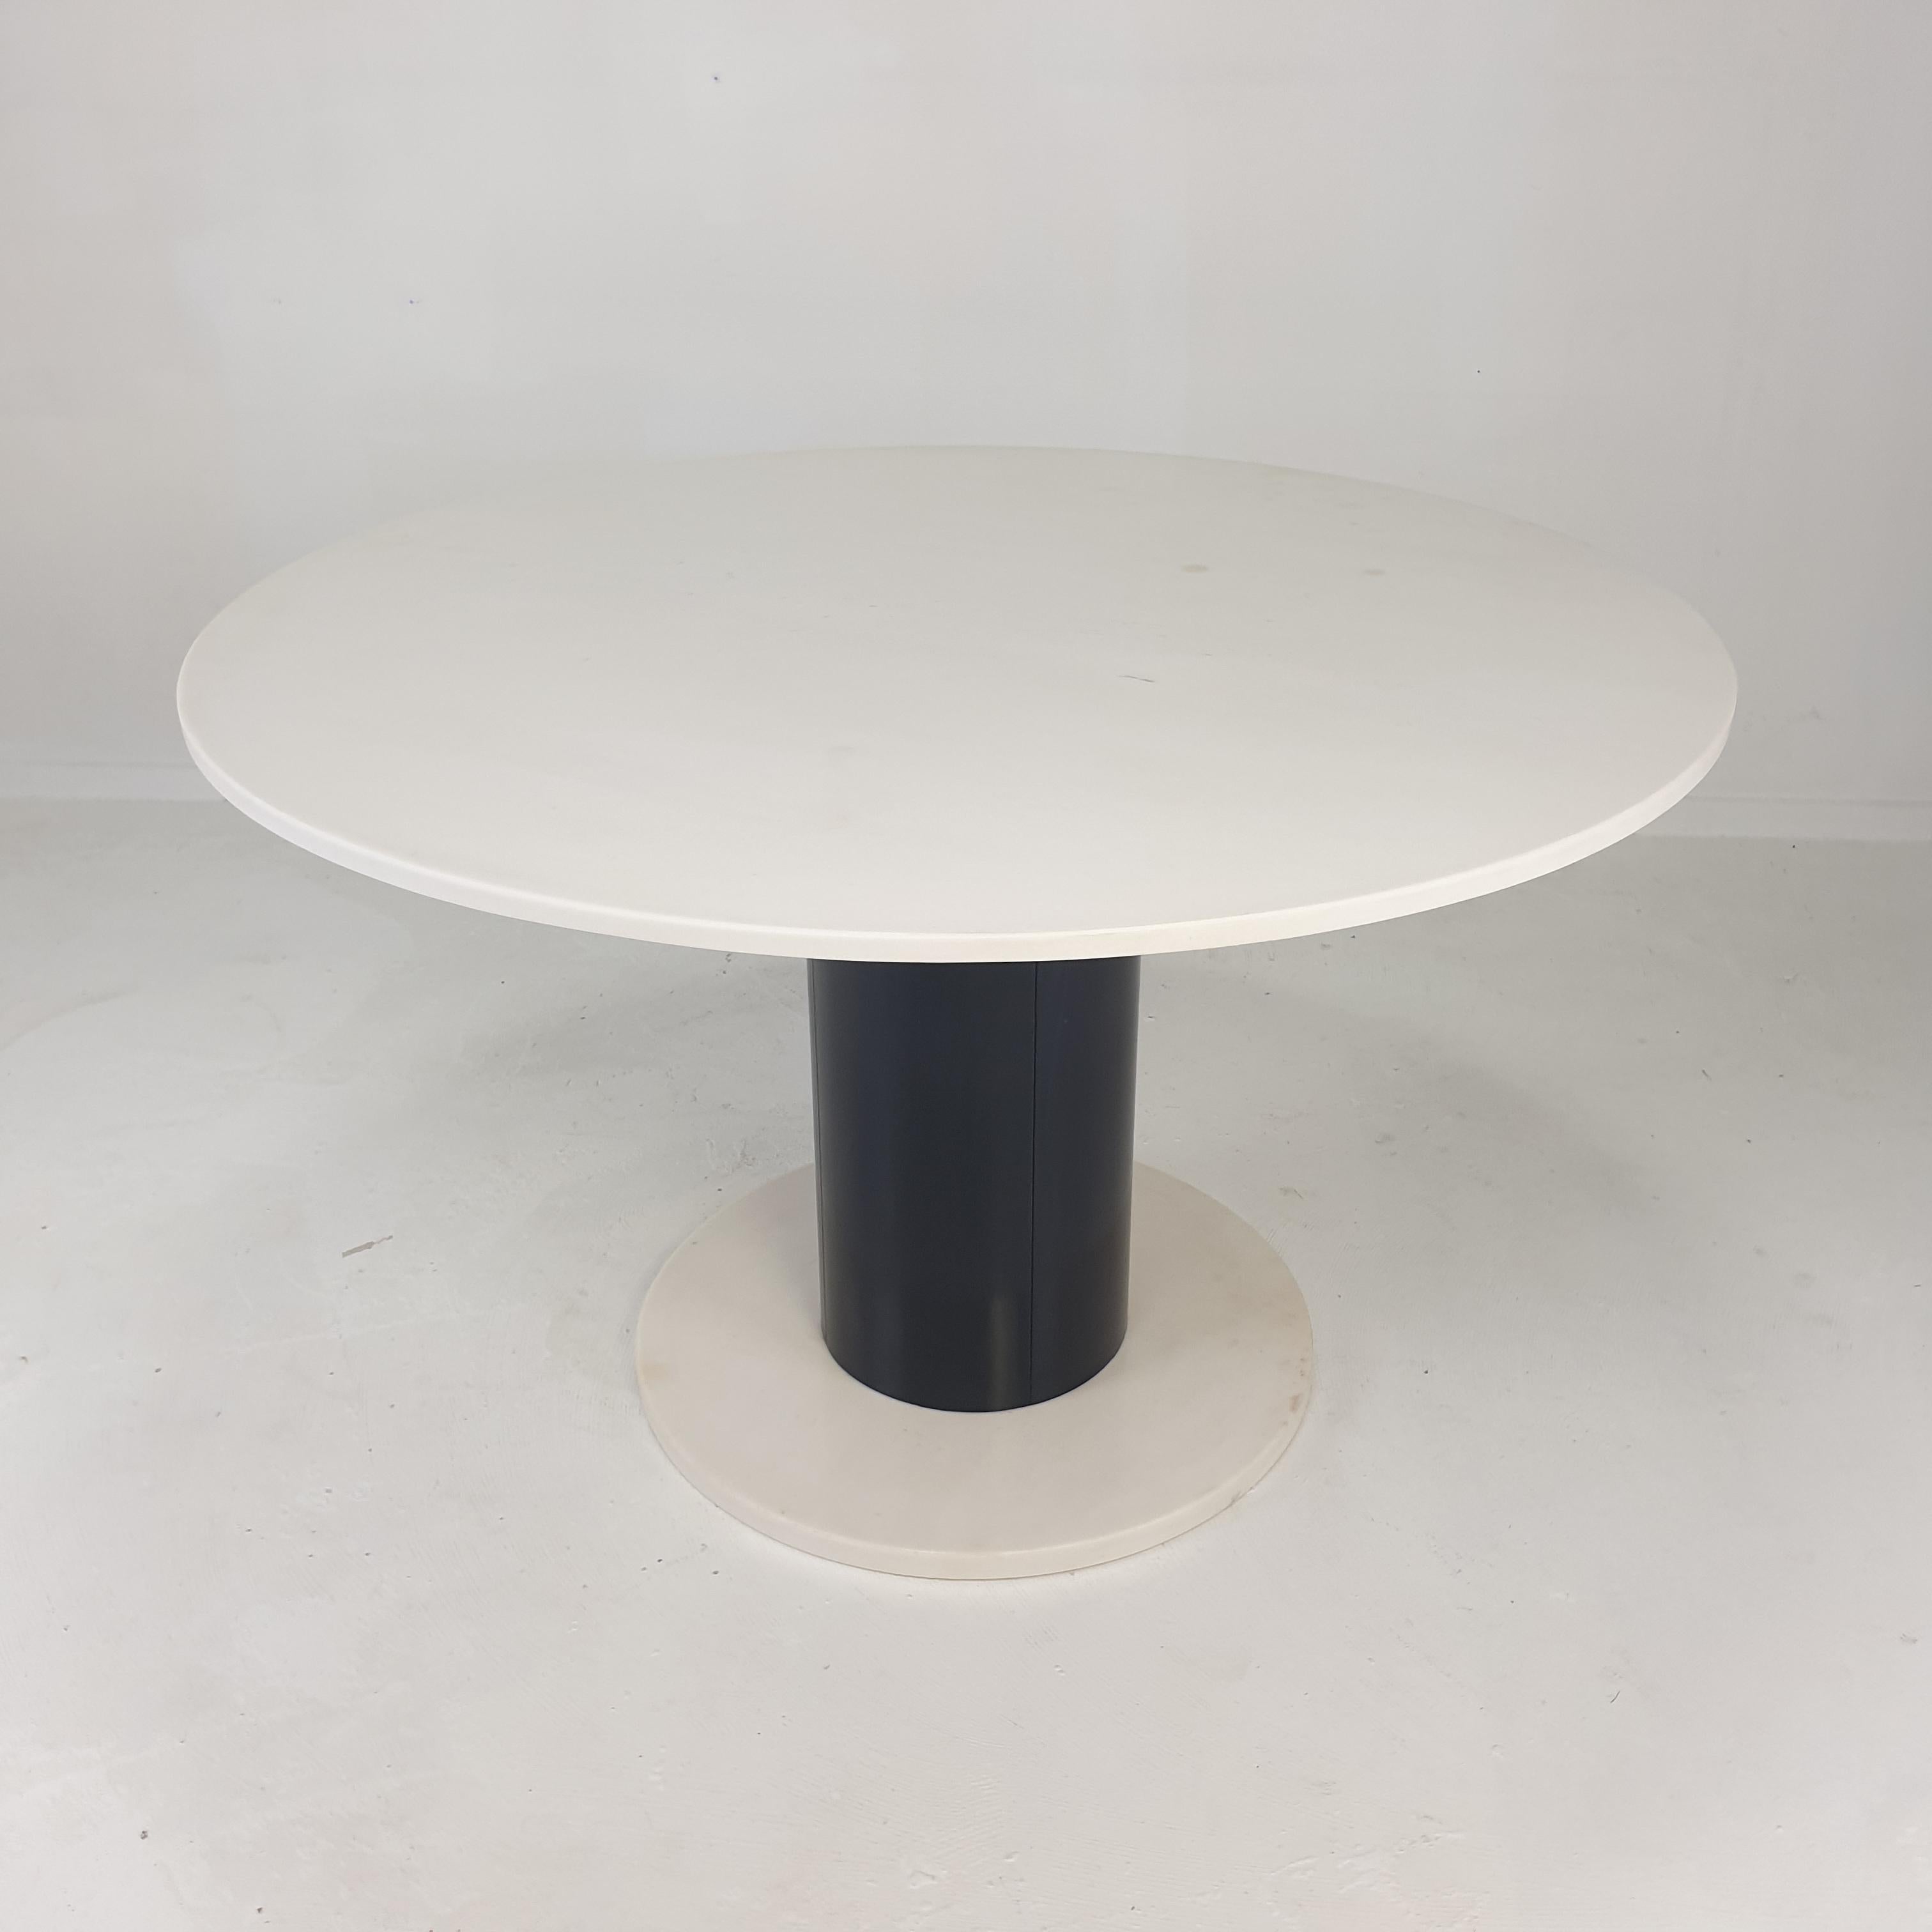 Beautiful marble dining table in te style of Ettore Sottsass, fabricated in Italy in the 80's.
It has a very nice Carrara marble round top.
The base is made of black painted steel and a Carrara marble foot.

A great contrast arises due to the